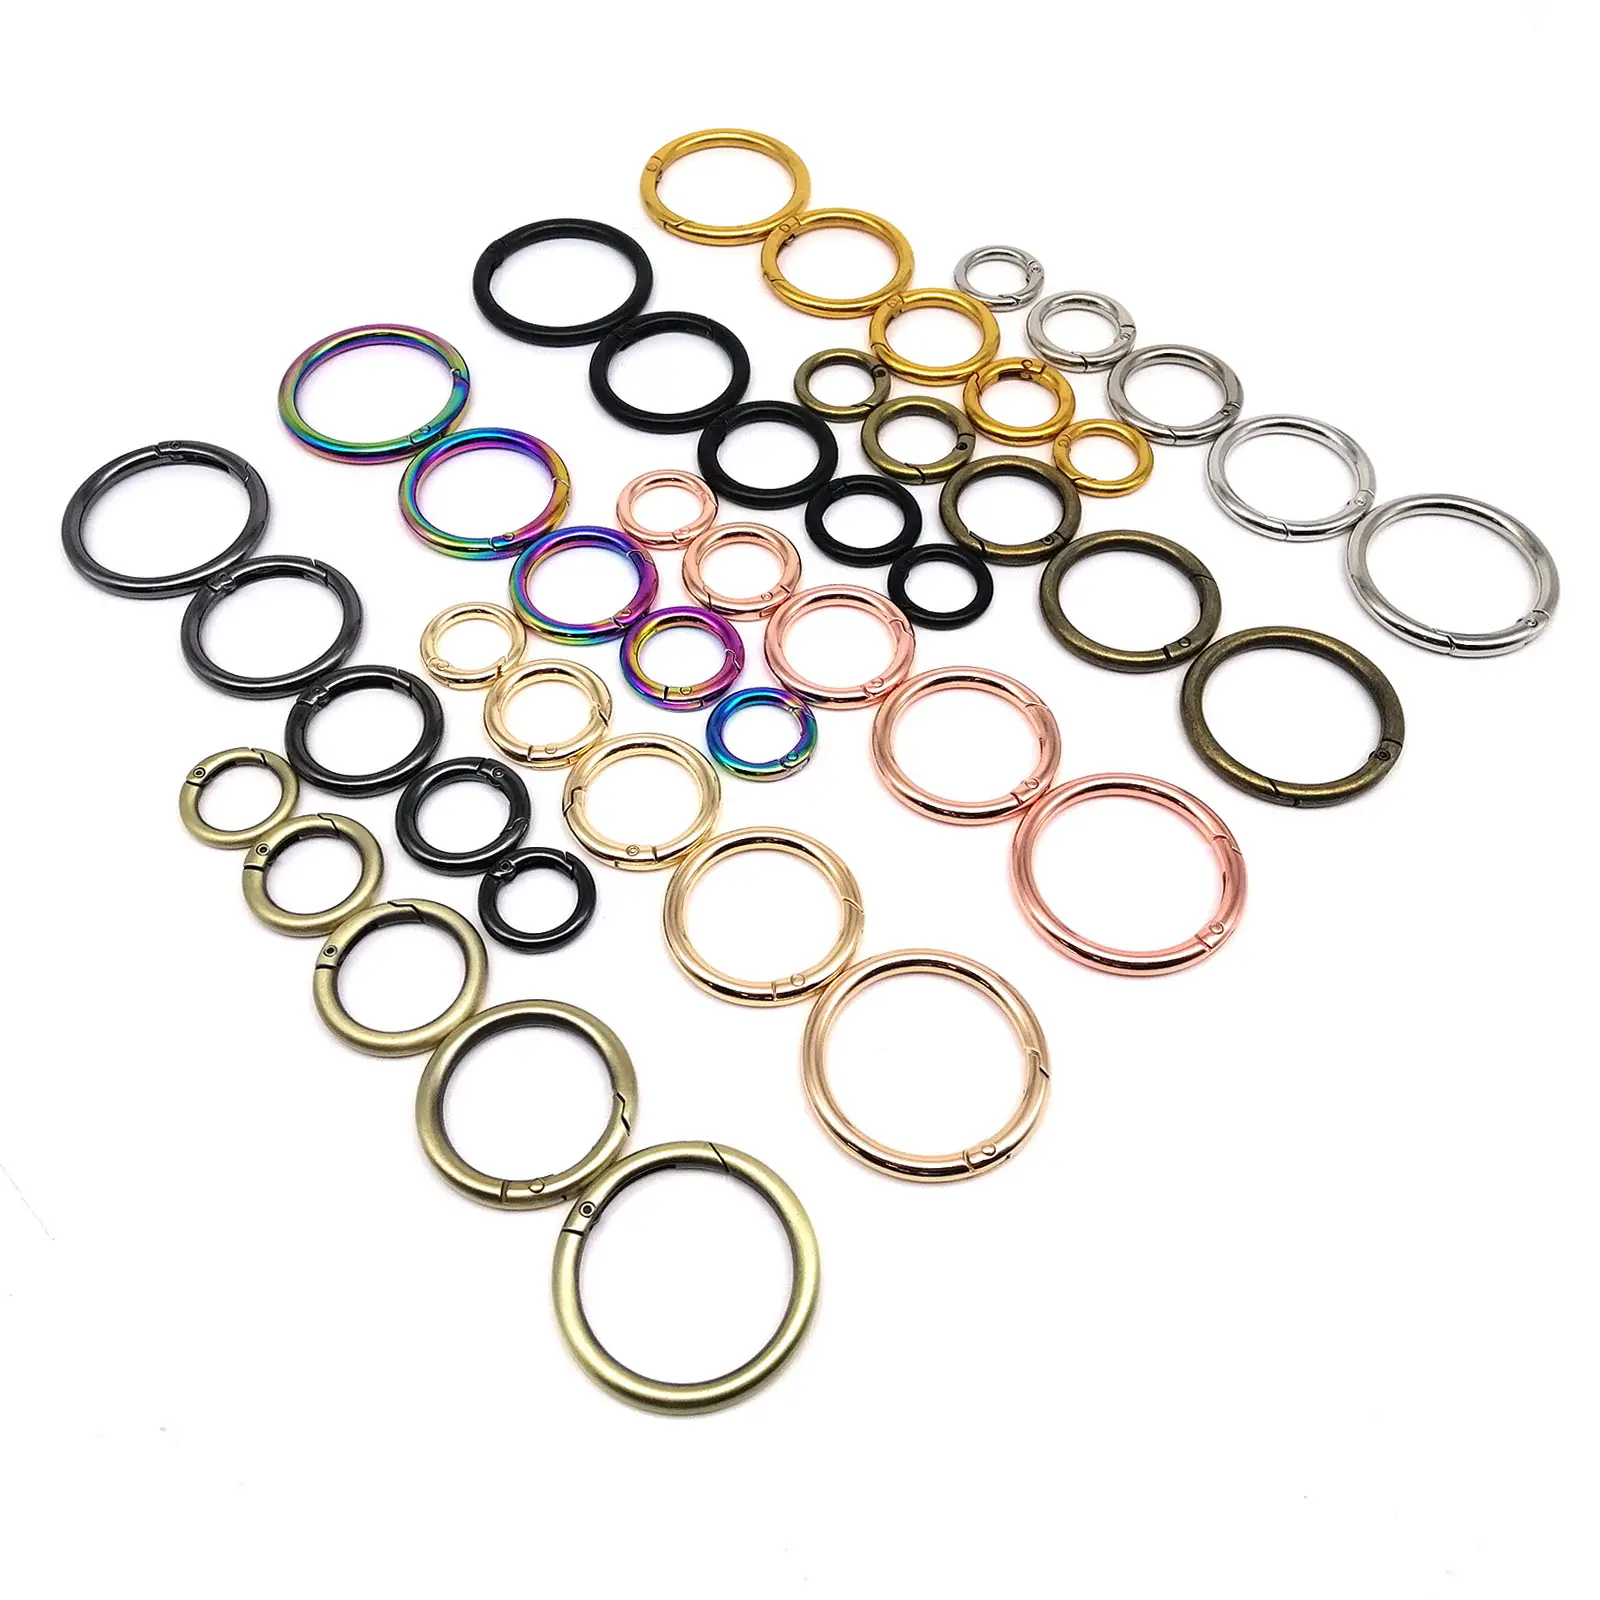 Custom Color Or In Stock Latest Zinc Alloy Spring Ring Key Ring Bag Metal Accessory Round Spring Gate Open O Ring